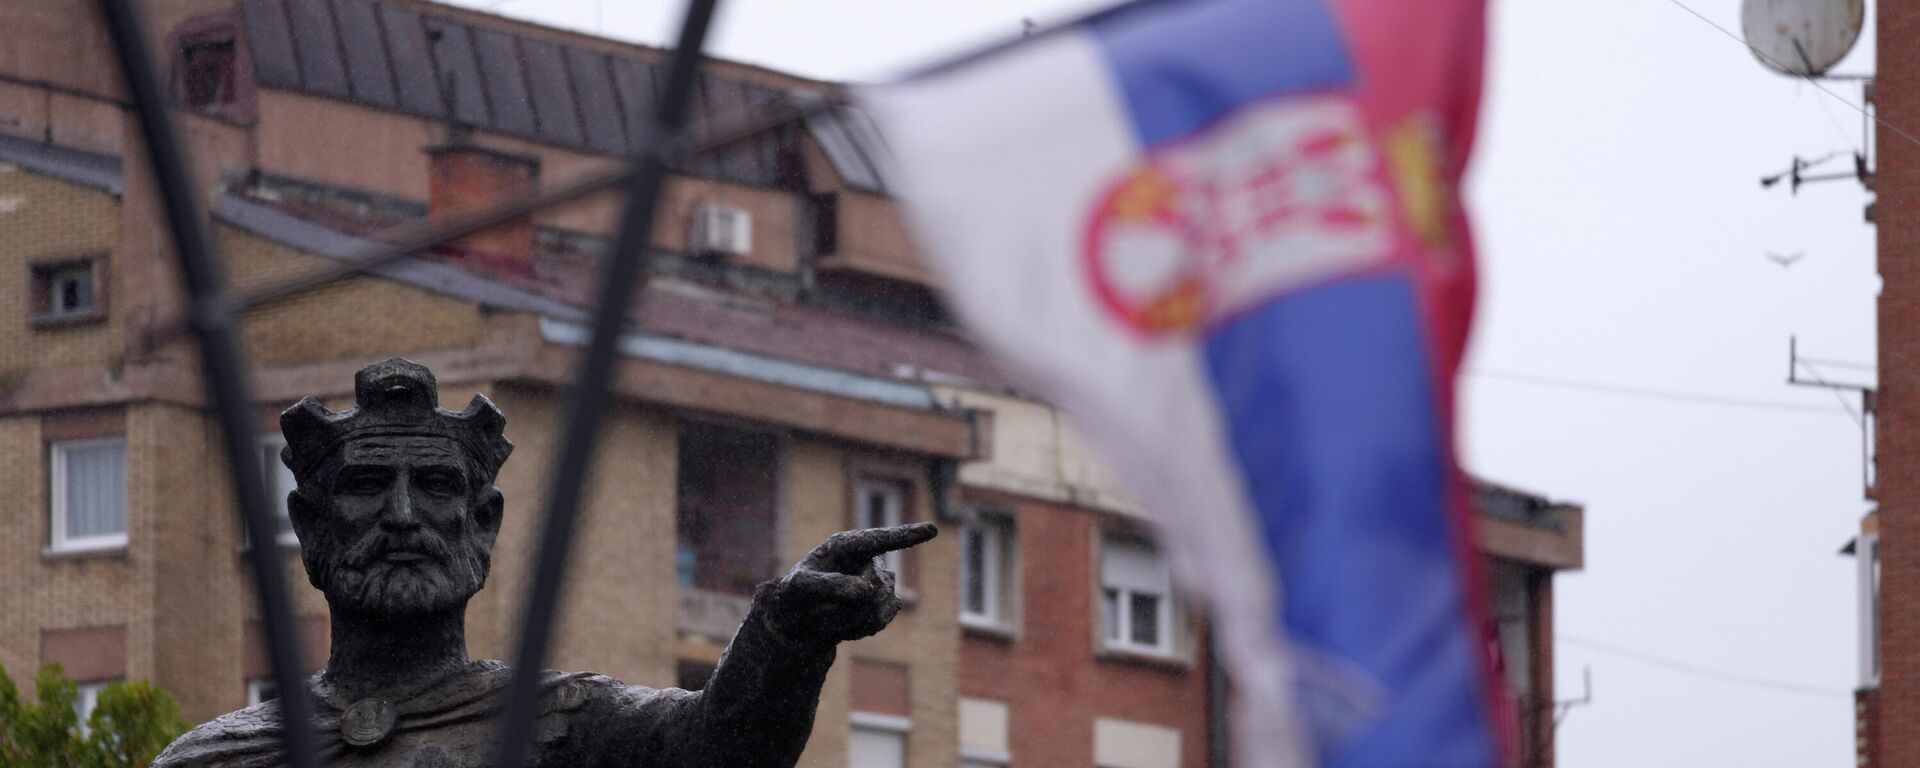 A Serbian flag waves in front of the statue of Serbian Duke Lazar who was killed at the Battle of Kosovo in June 1389, in northern, Serb-dominated part of ethnically divided town of Mitrovica, Kosovo, Friday, Oct. 15, 2021.  - Sputnik International, 1920, 22.10.2021